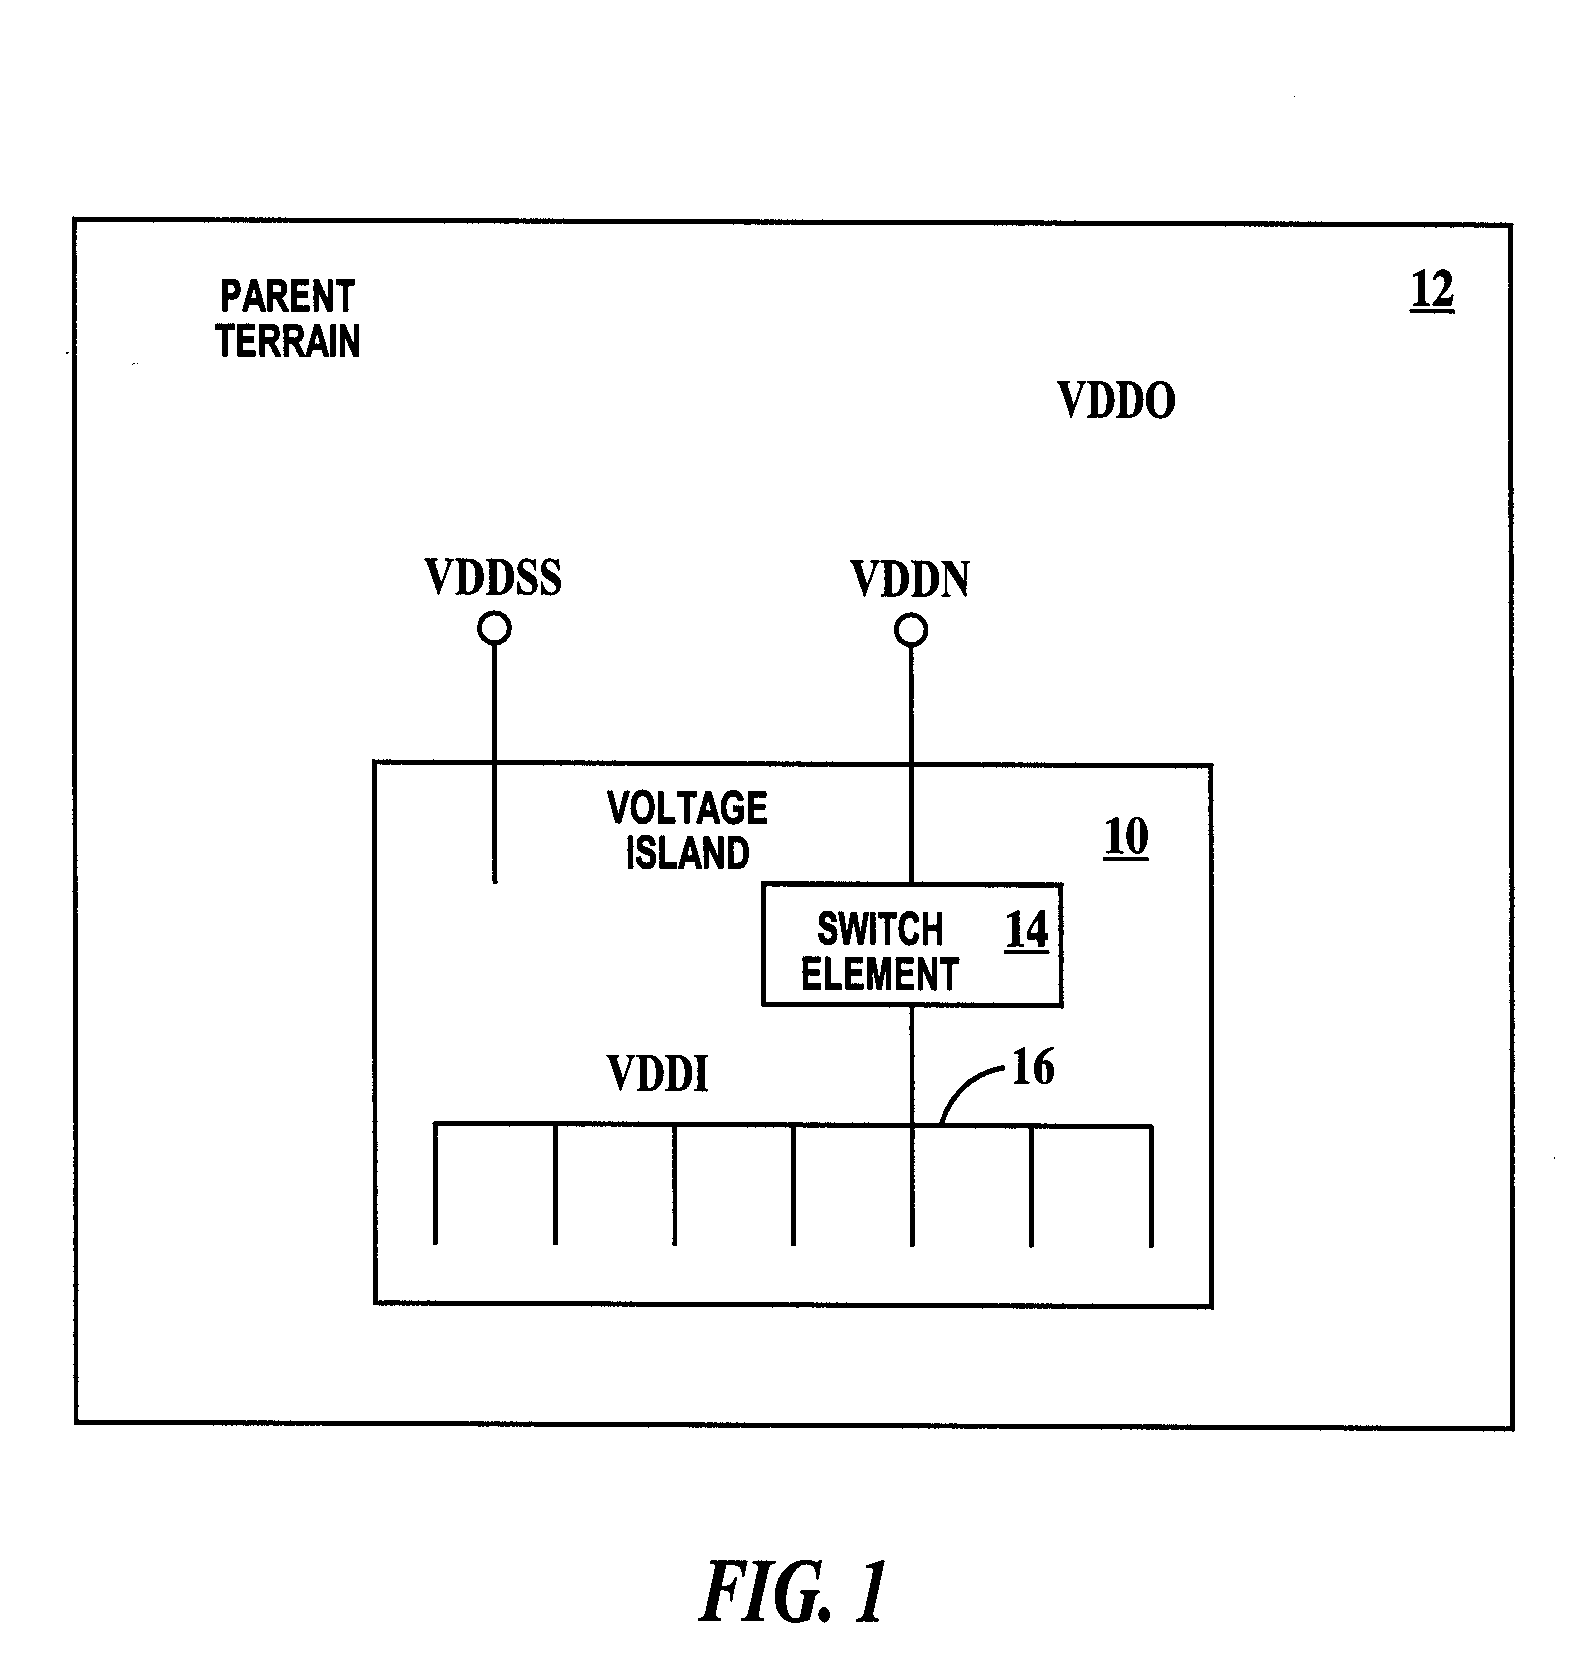 Nested voltage island architecture